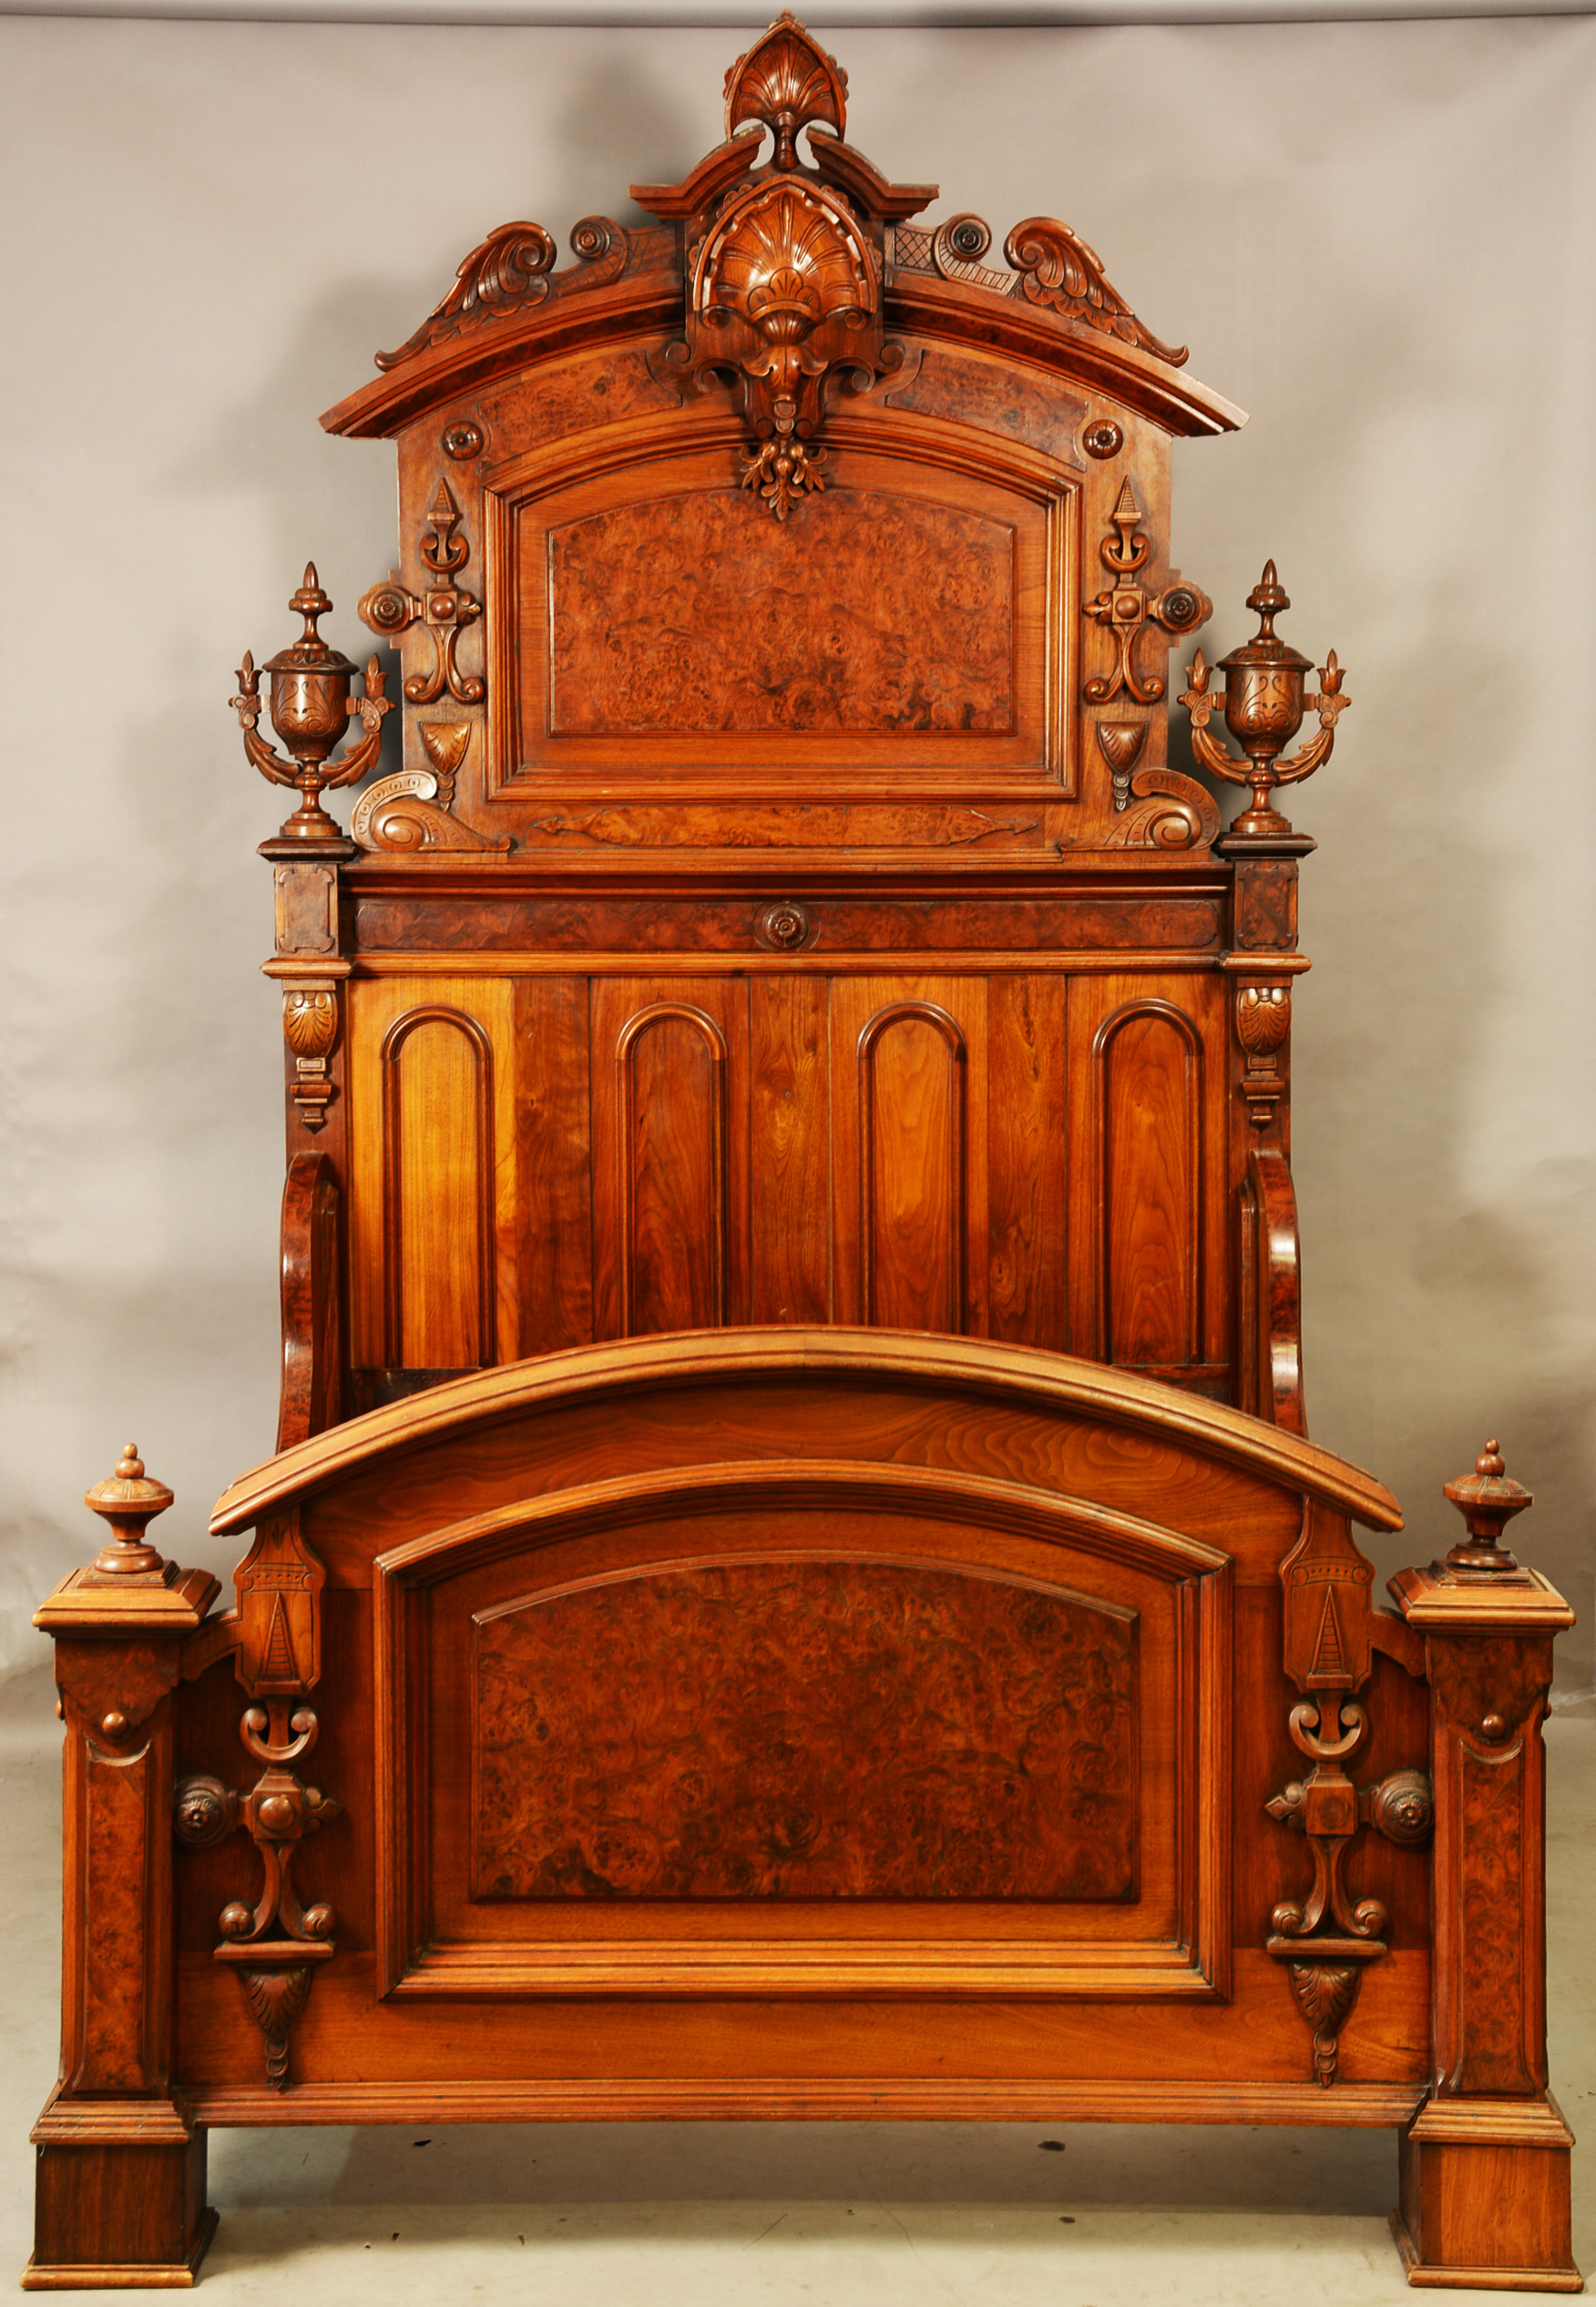 American Renaissance revival walnut bedroom set, four-pieces with high-back headboard having a shell-carved crest, raised burl panels and turned finial. Estimate: $4,000-$7,500. Bruhns Auction Gallery image